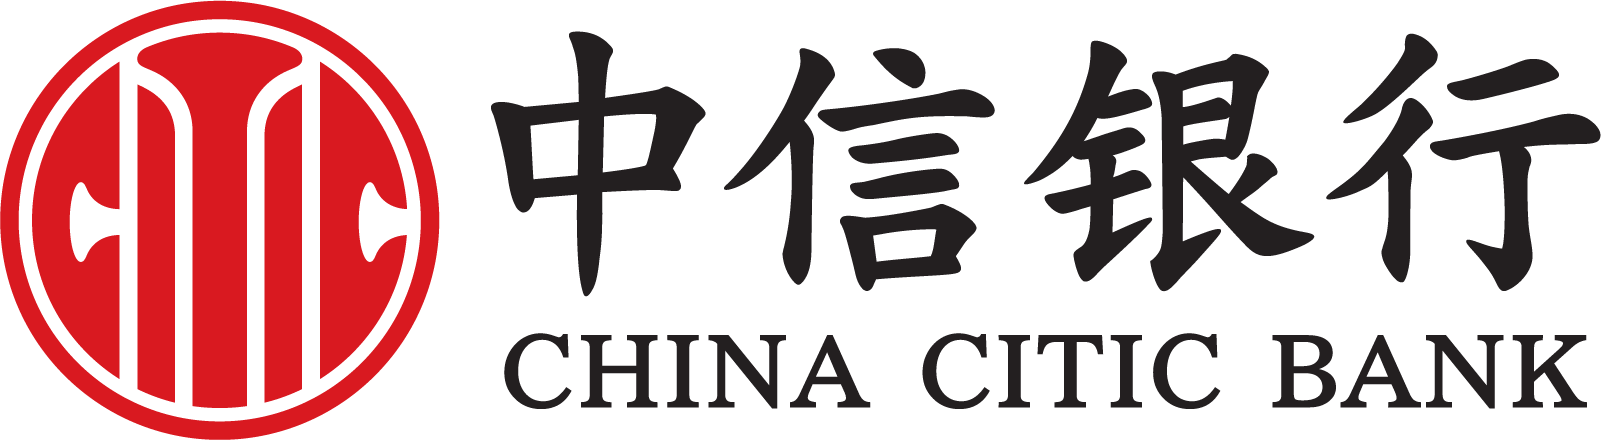 China Citic Bank Logo Background PNG Image